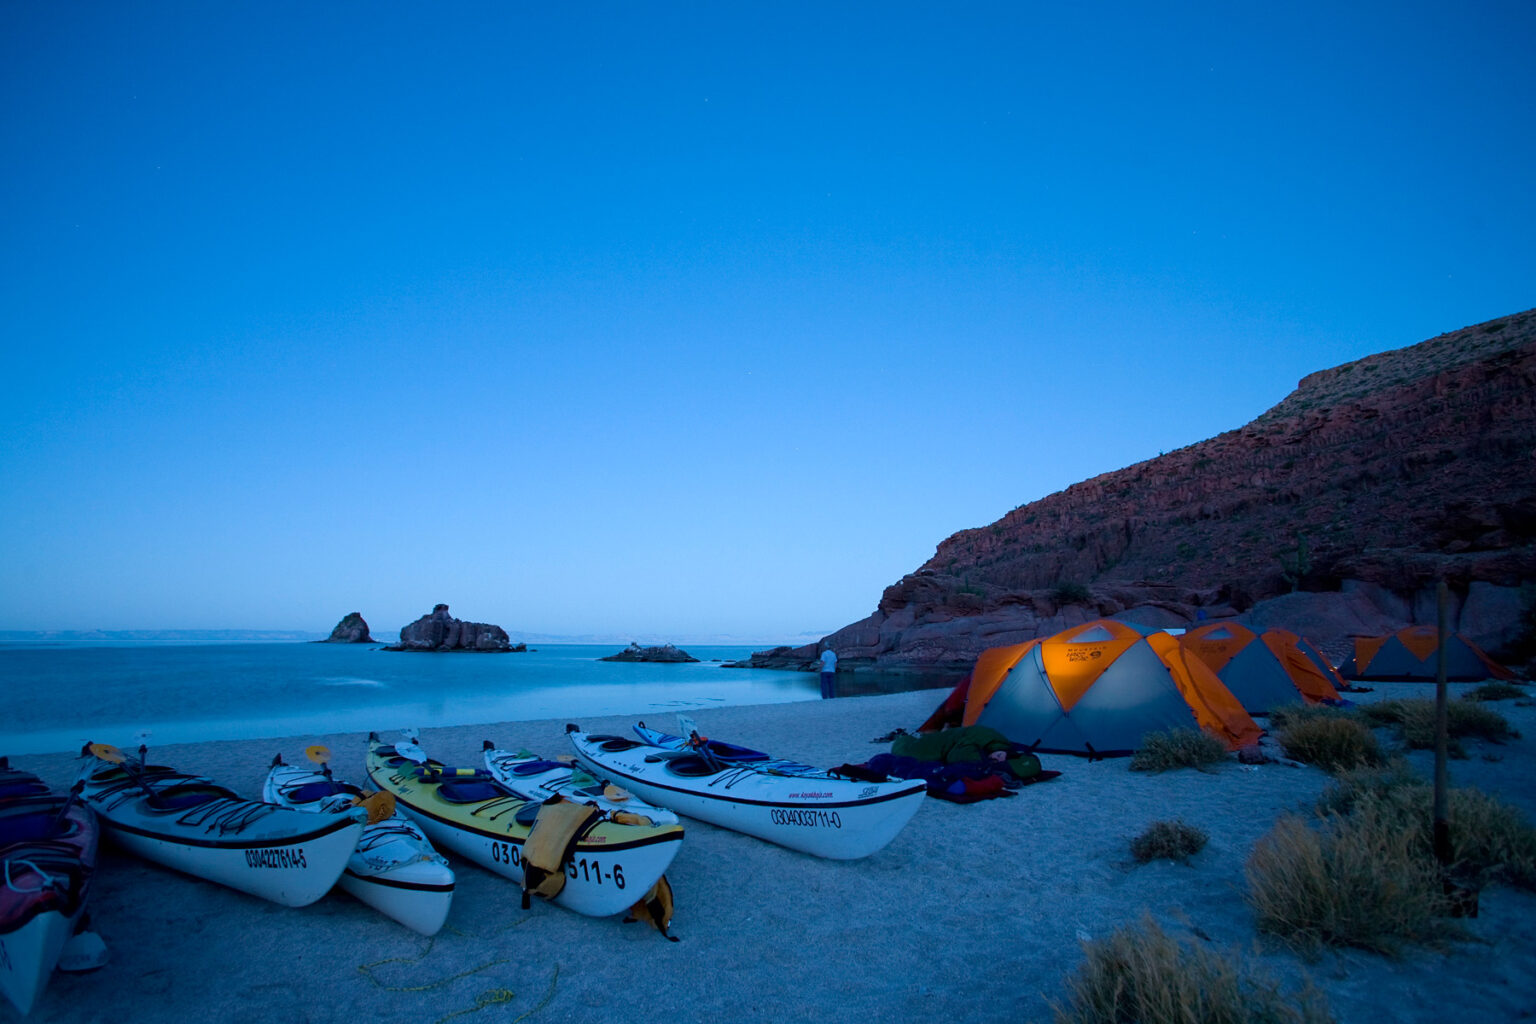 Twilight view of sea kayaks and tents on a sandy beach next to the ocean in Baja Mexico